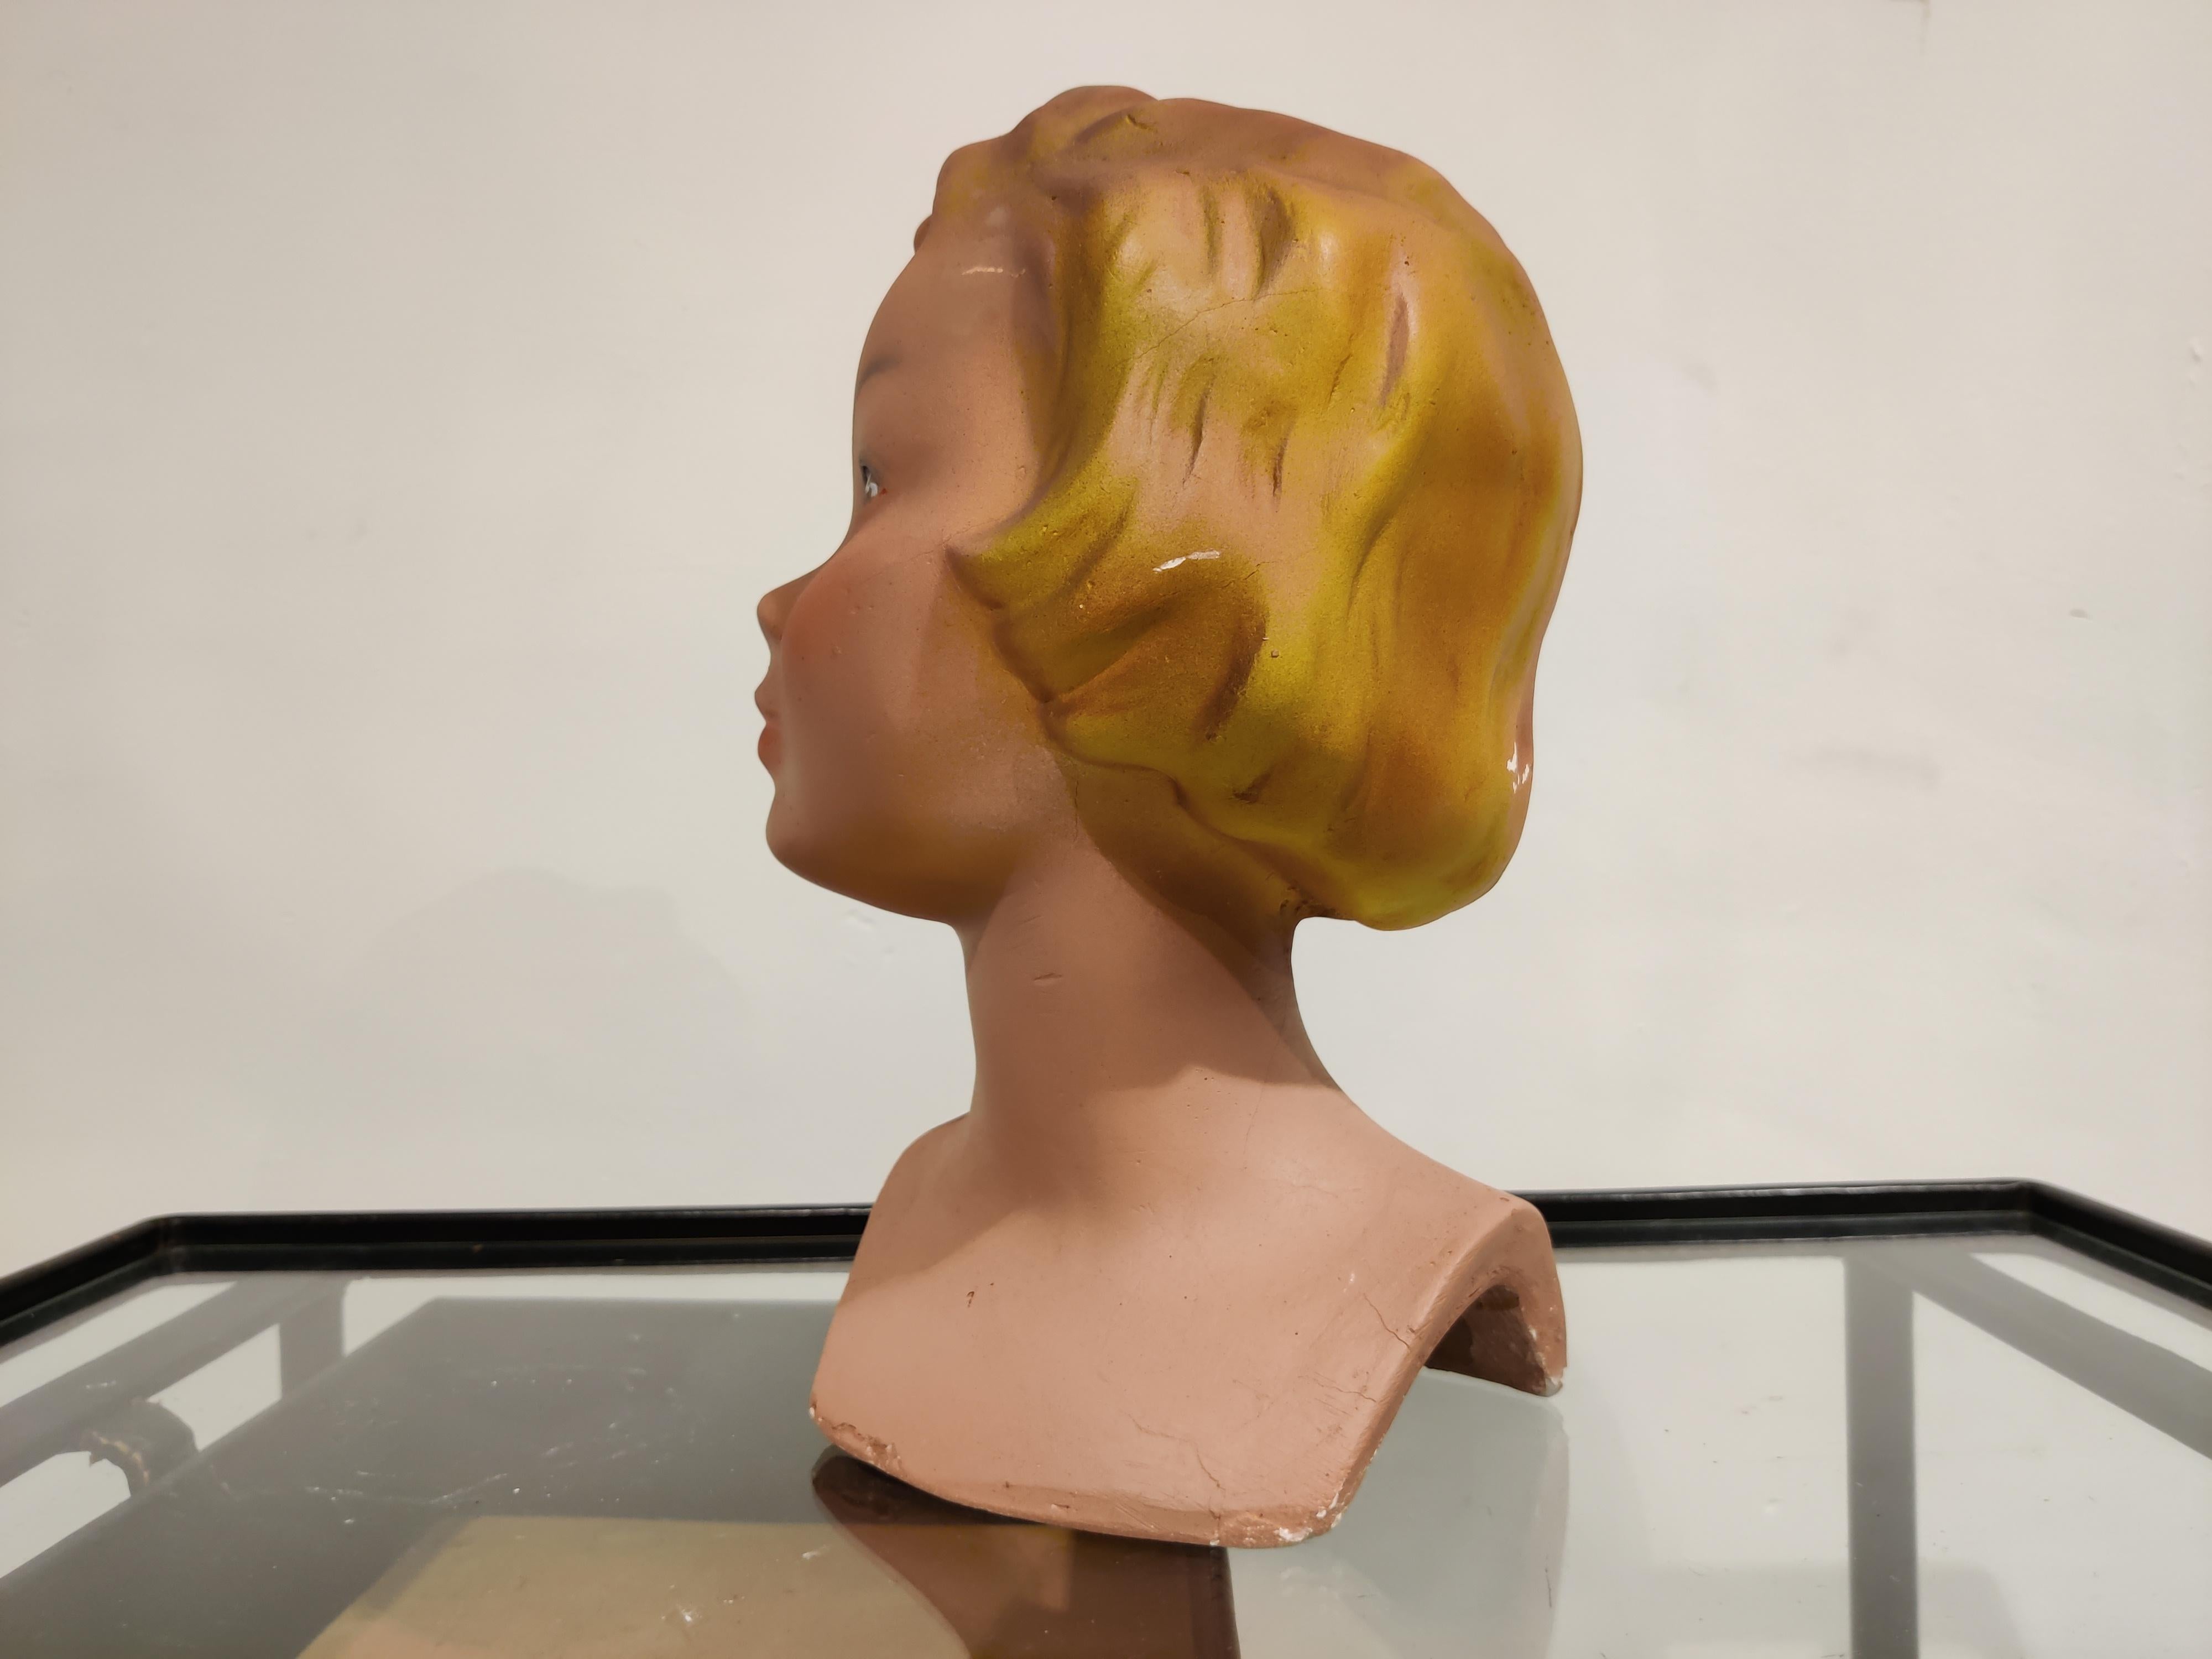 Beautiful female/child mannequin head made from plaster.

It has some minor user traces.

Comes from a lot acquired from a clothes shop that stopped activities.

Great decorative item to display glasses, hats,

France, 1960s

Measures: